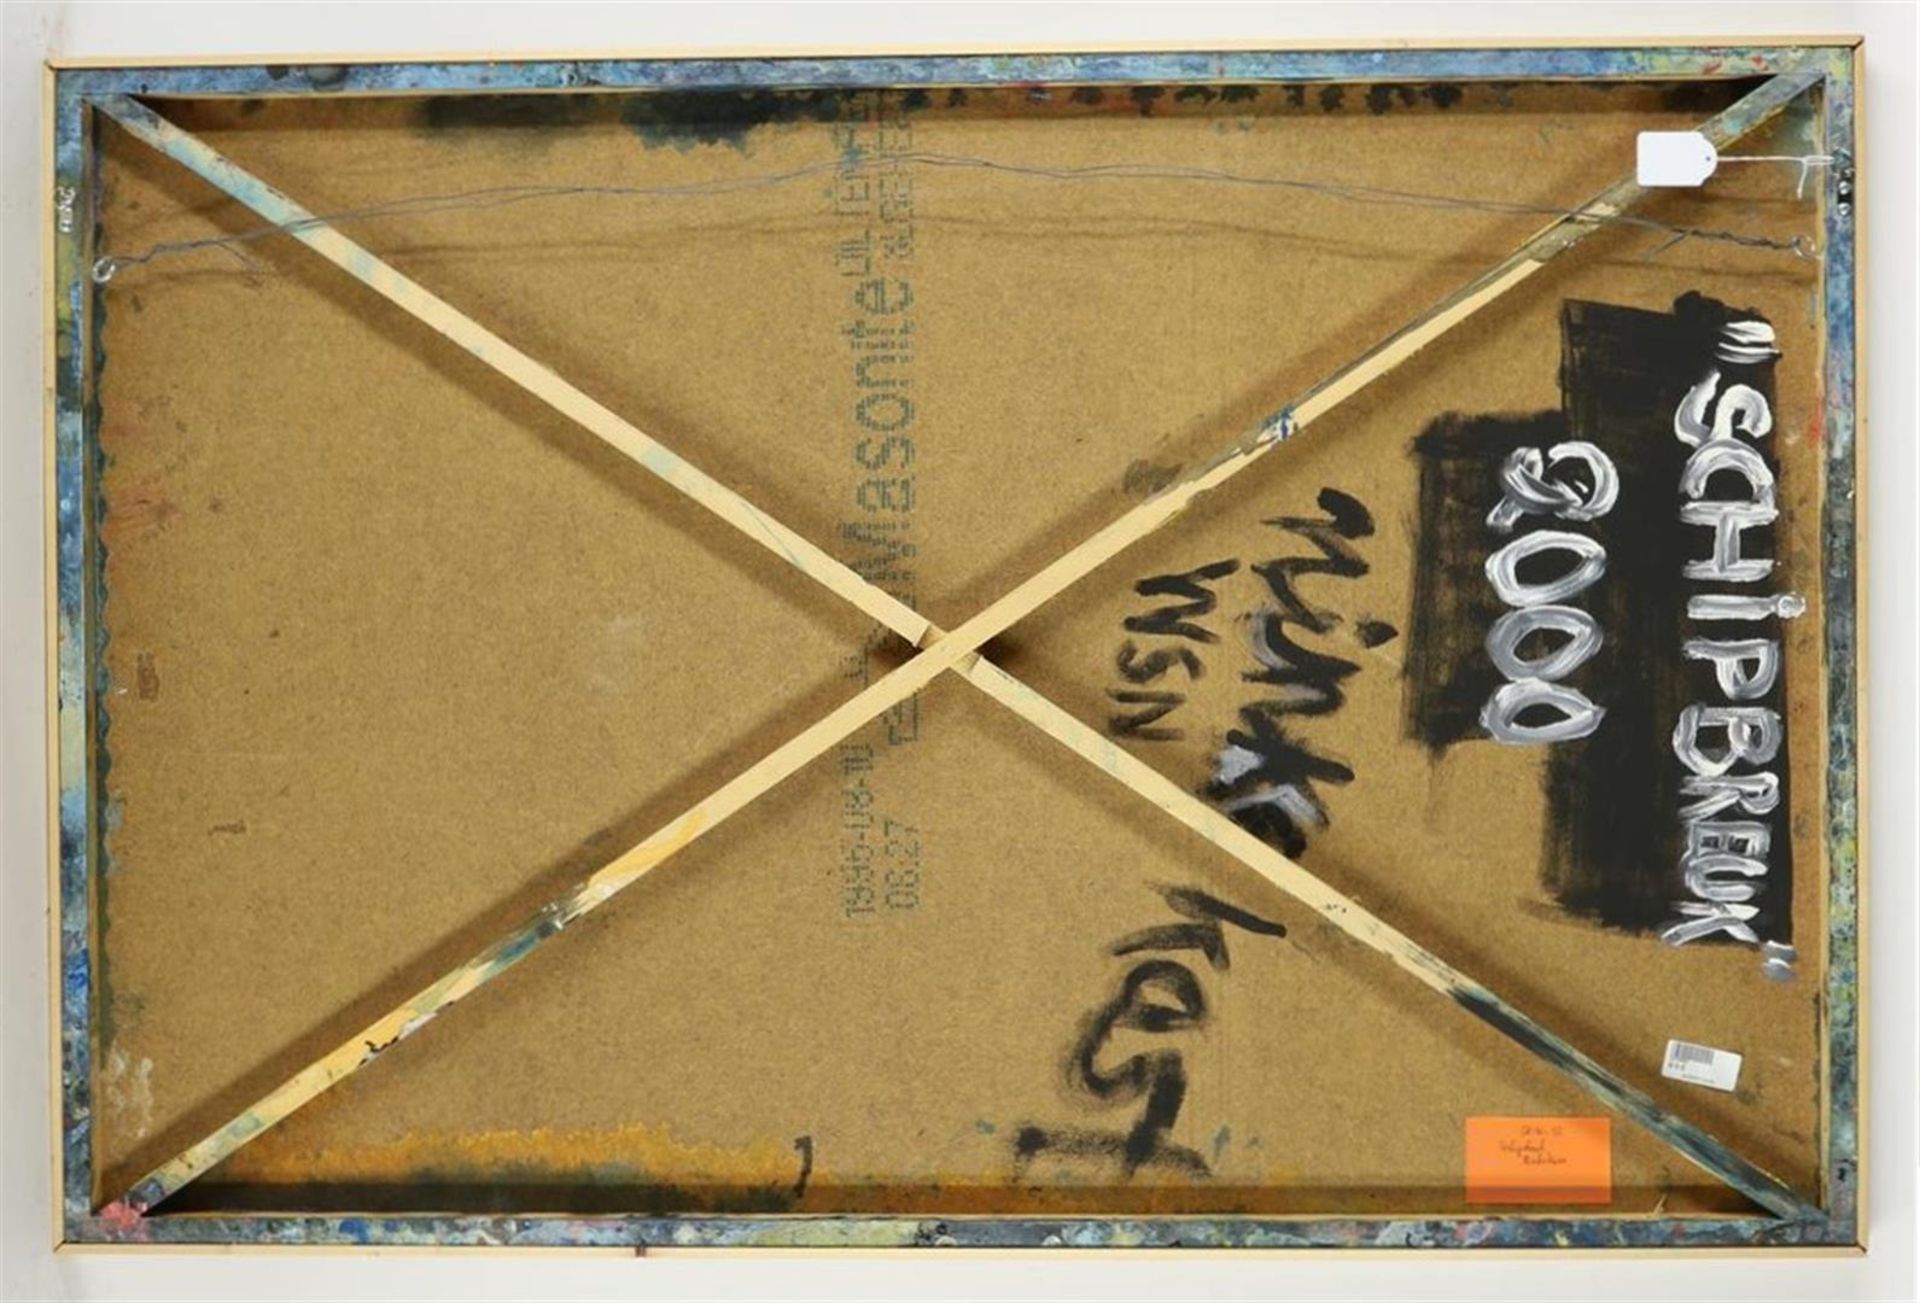 Ninke Kast (1926-2022) 'Shipwreck', signed and dated 2000 on the reverse, board 80 x 120 cm. - Image 3 of 3